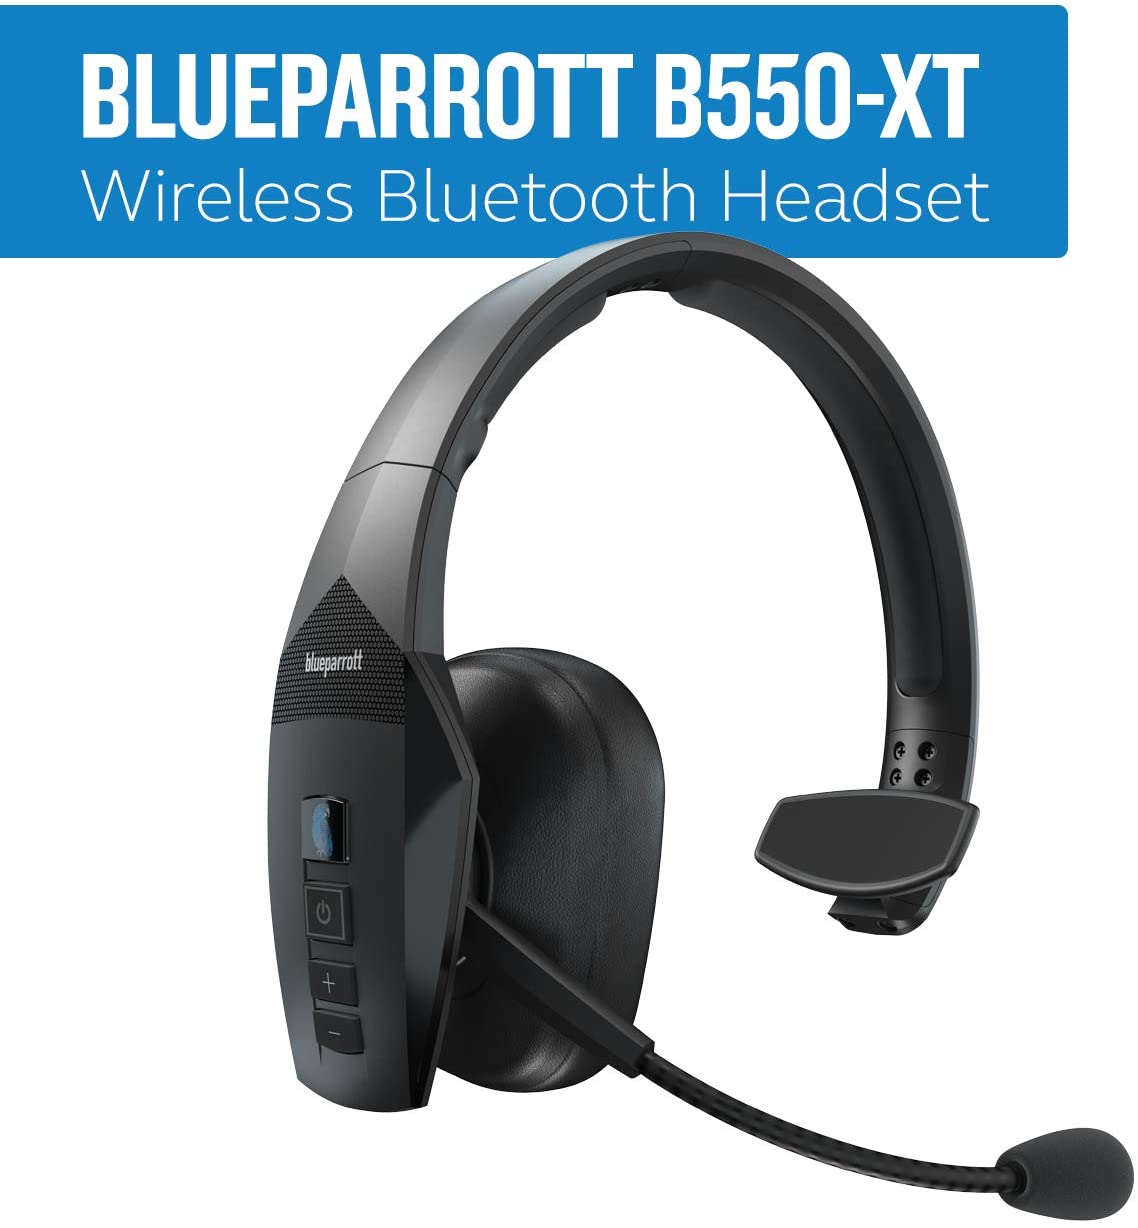 Thumbnail of Voice-Controlled Bluetooth Headset.